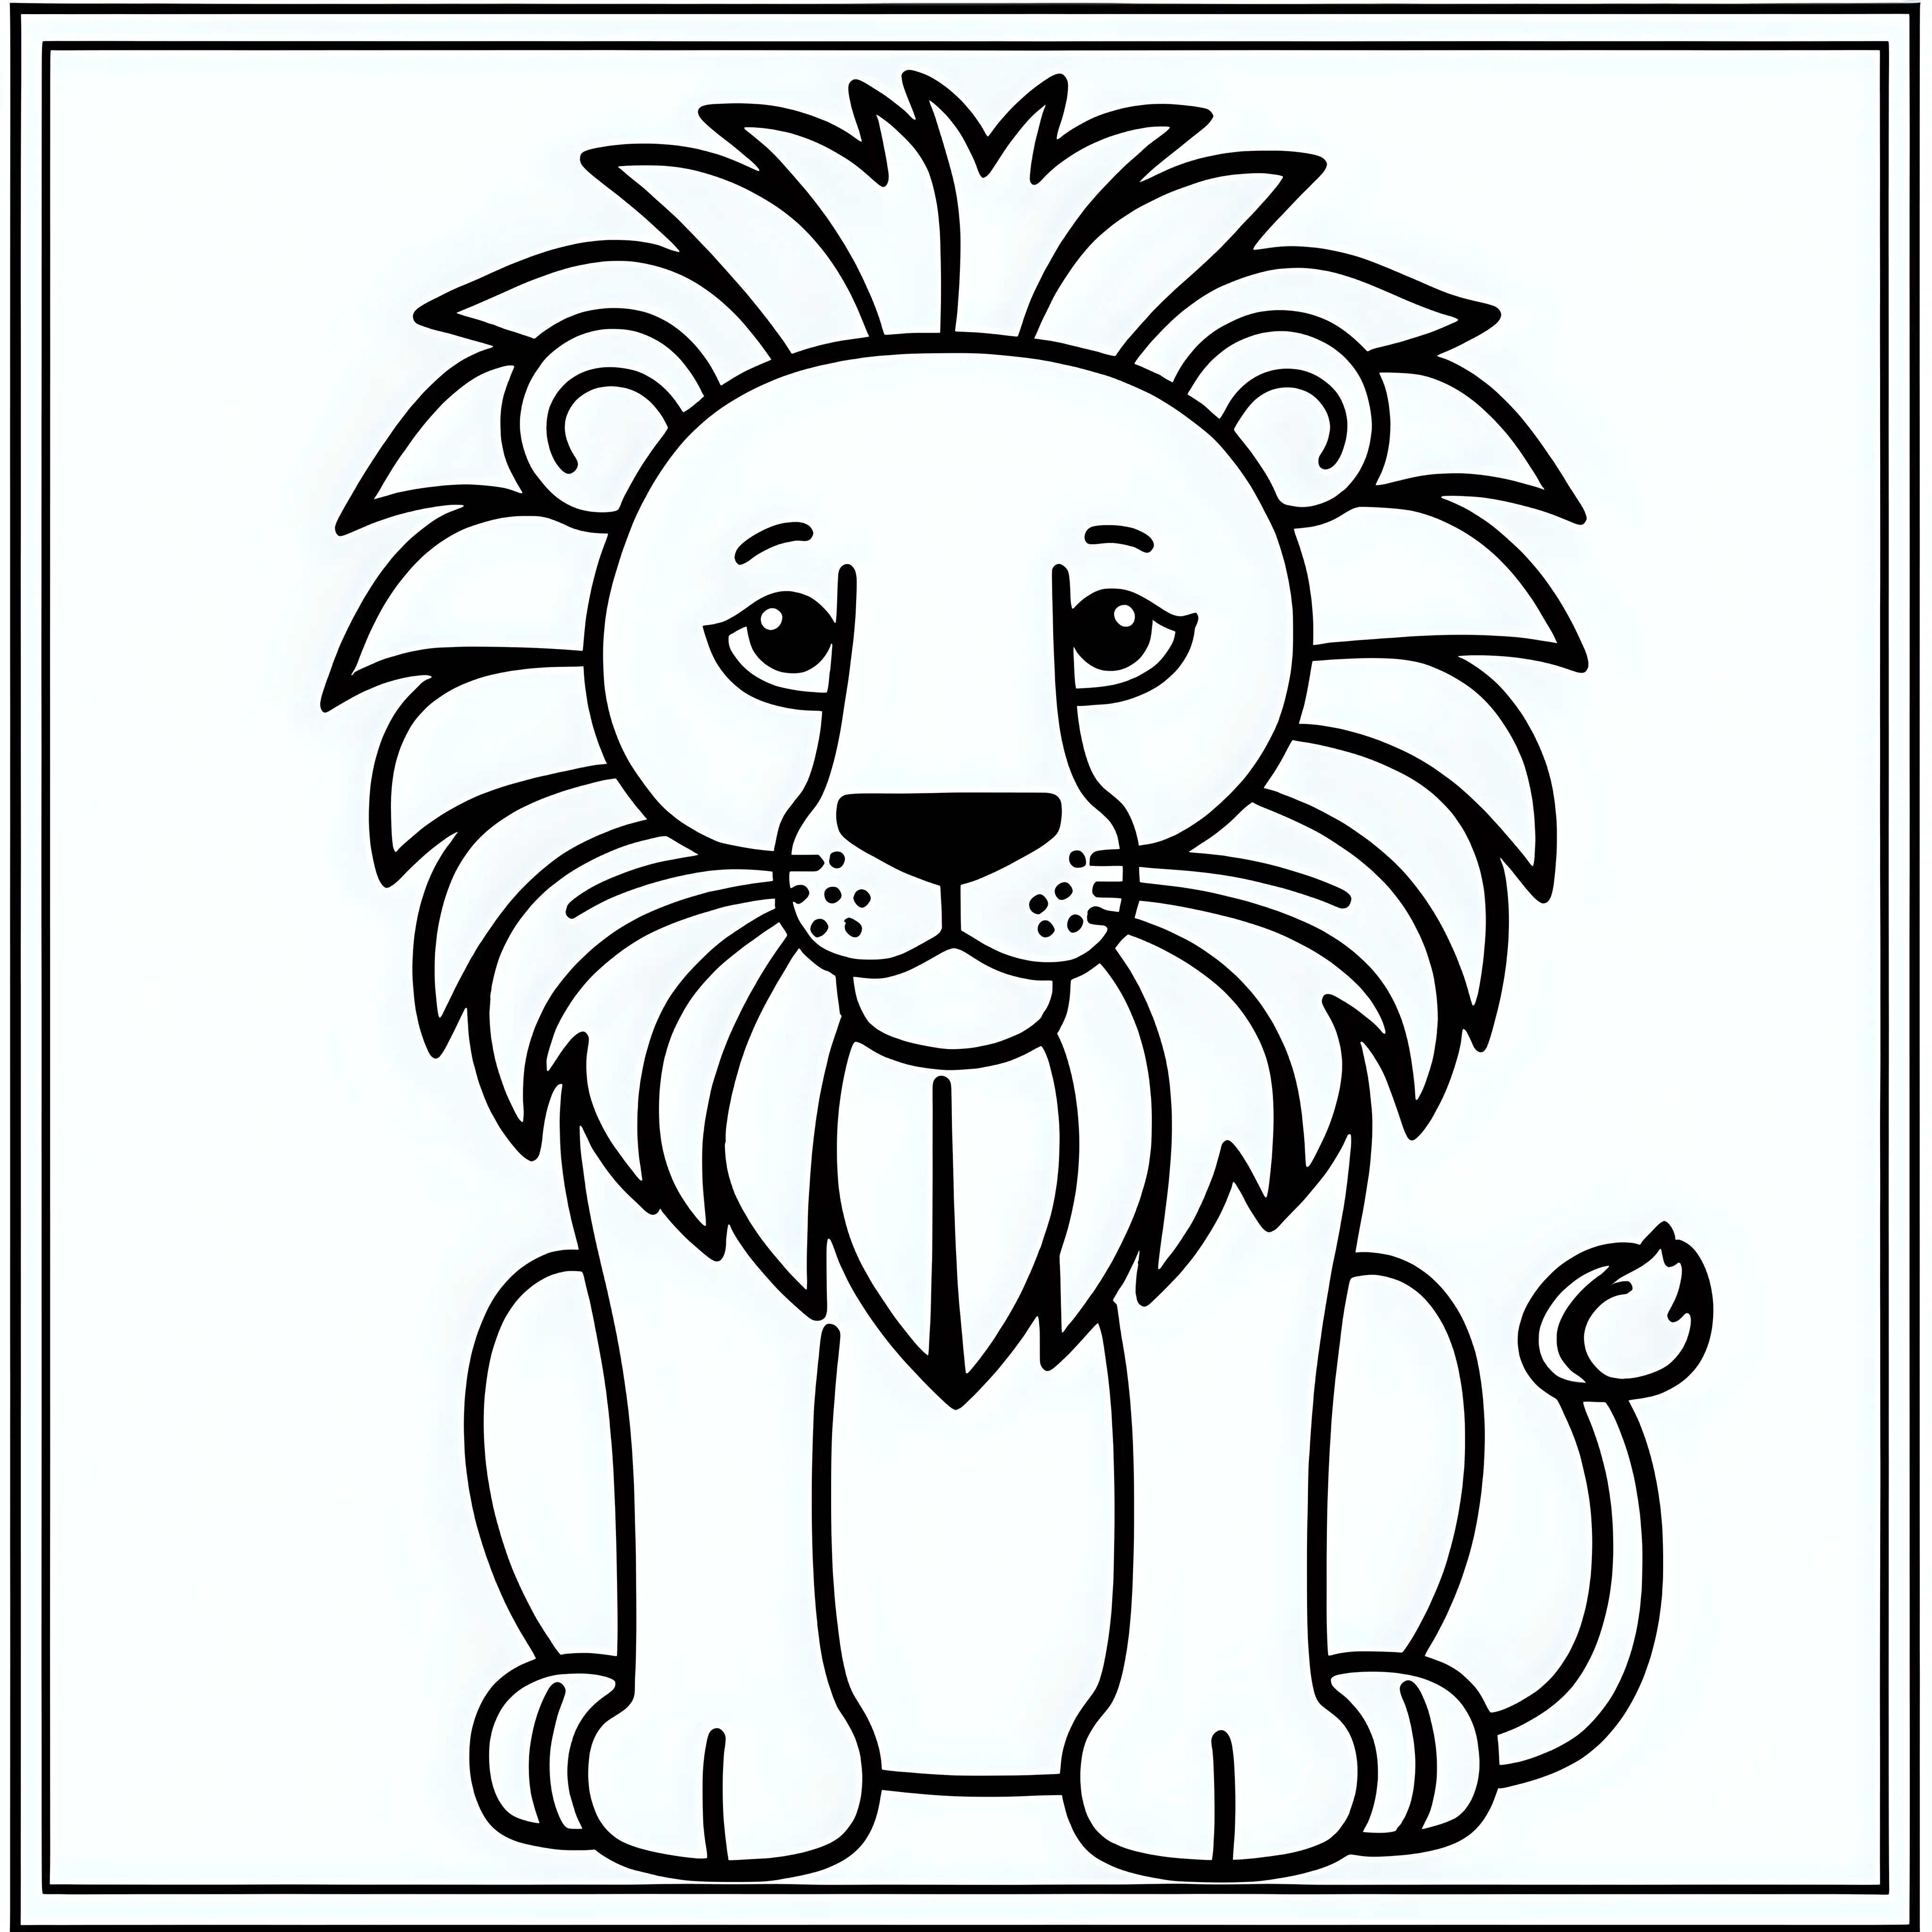 Lion Coloring Page Simple Black Line Drawing for Childrens Art